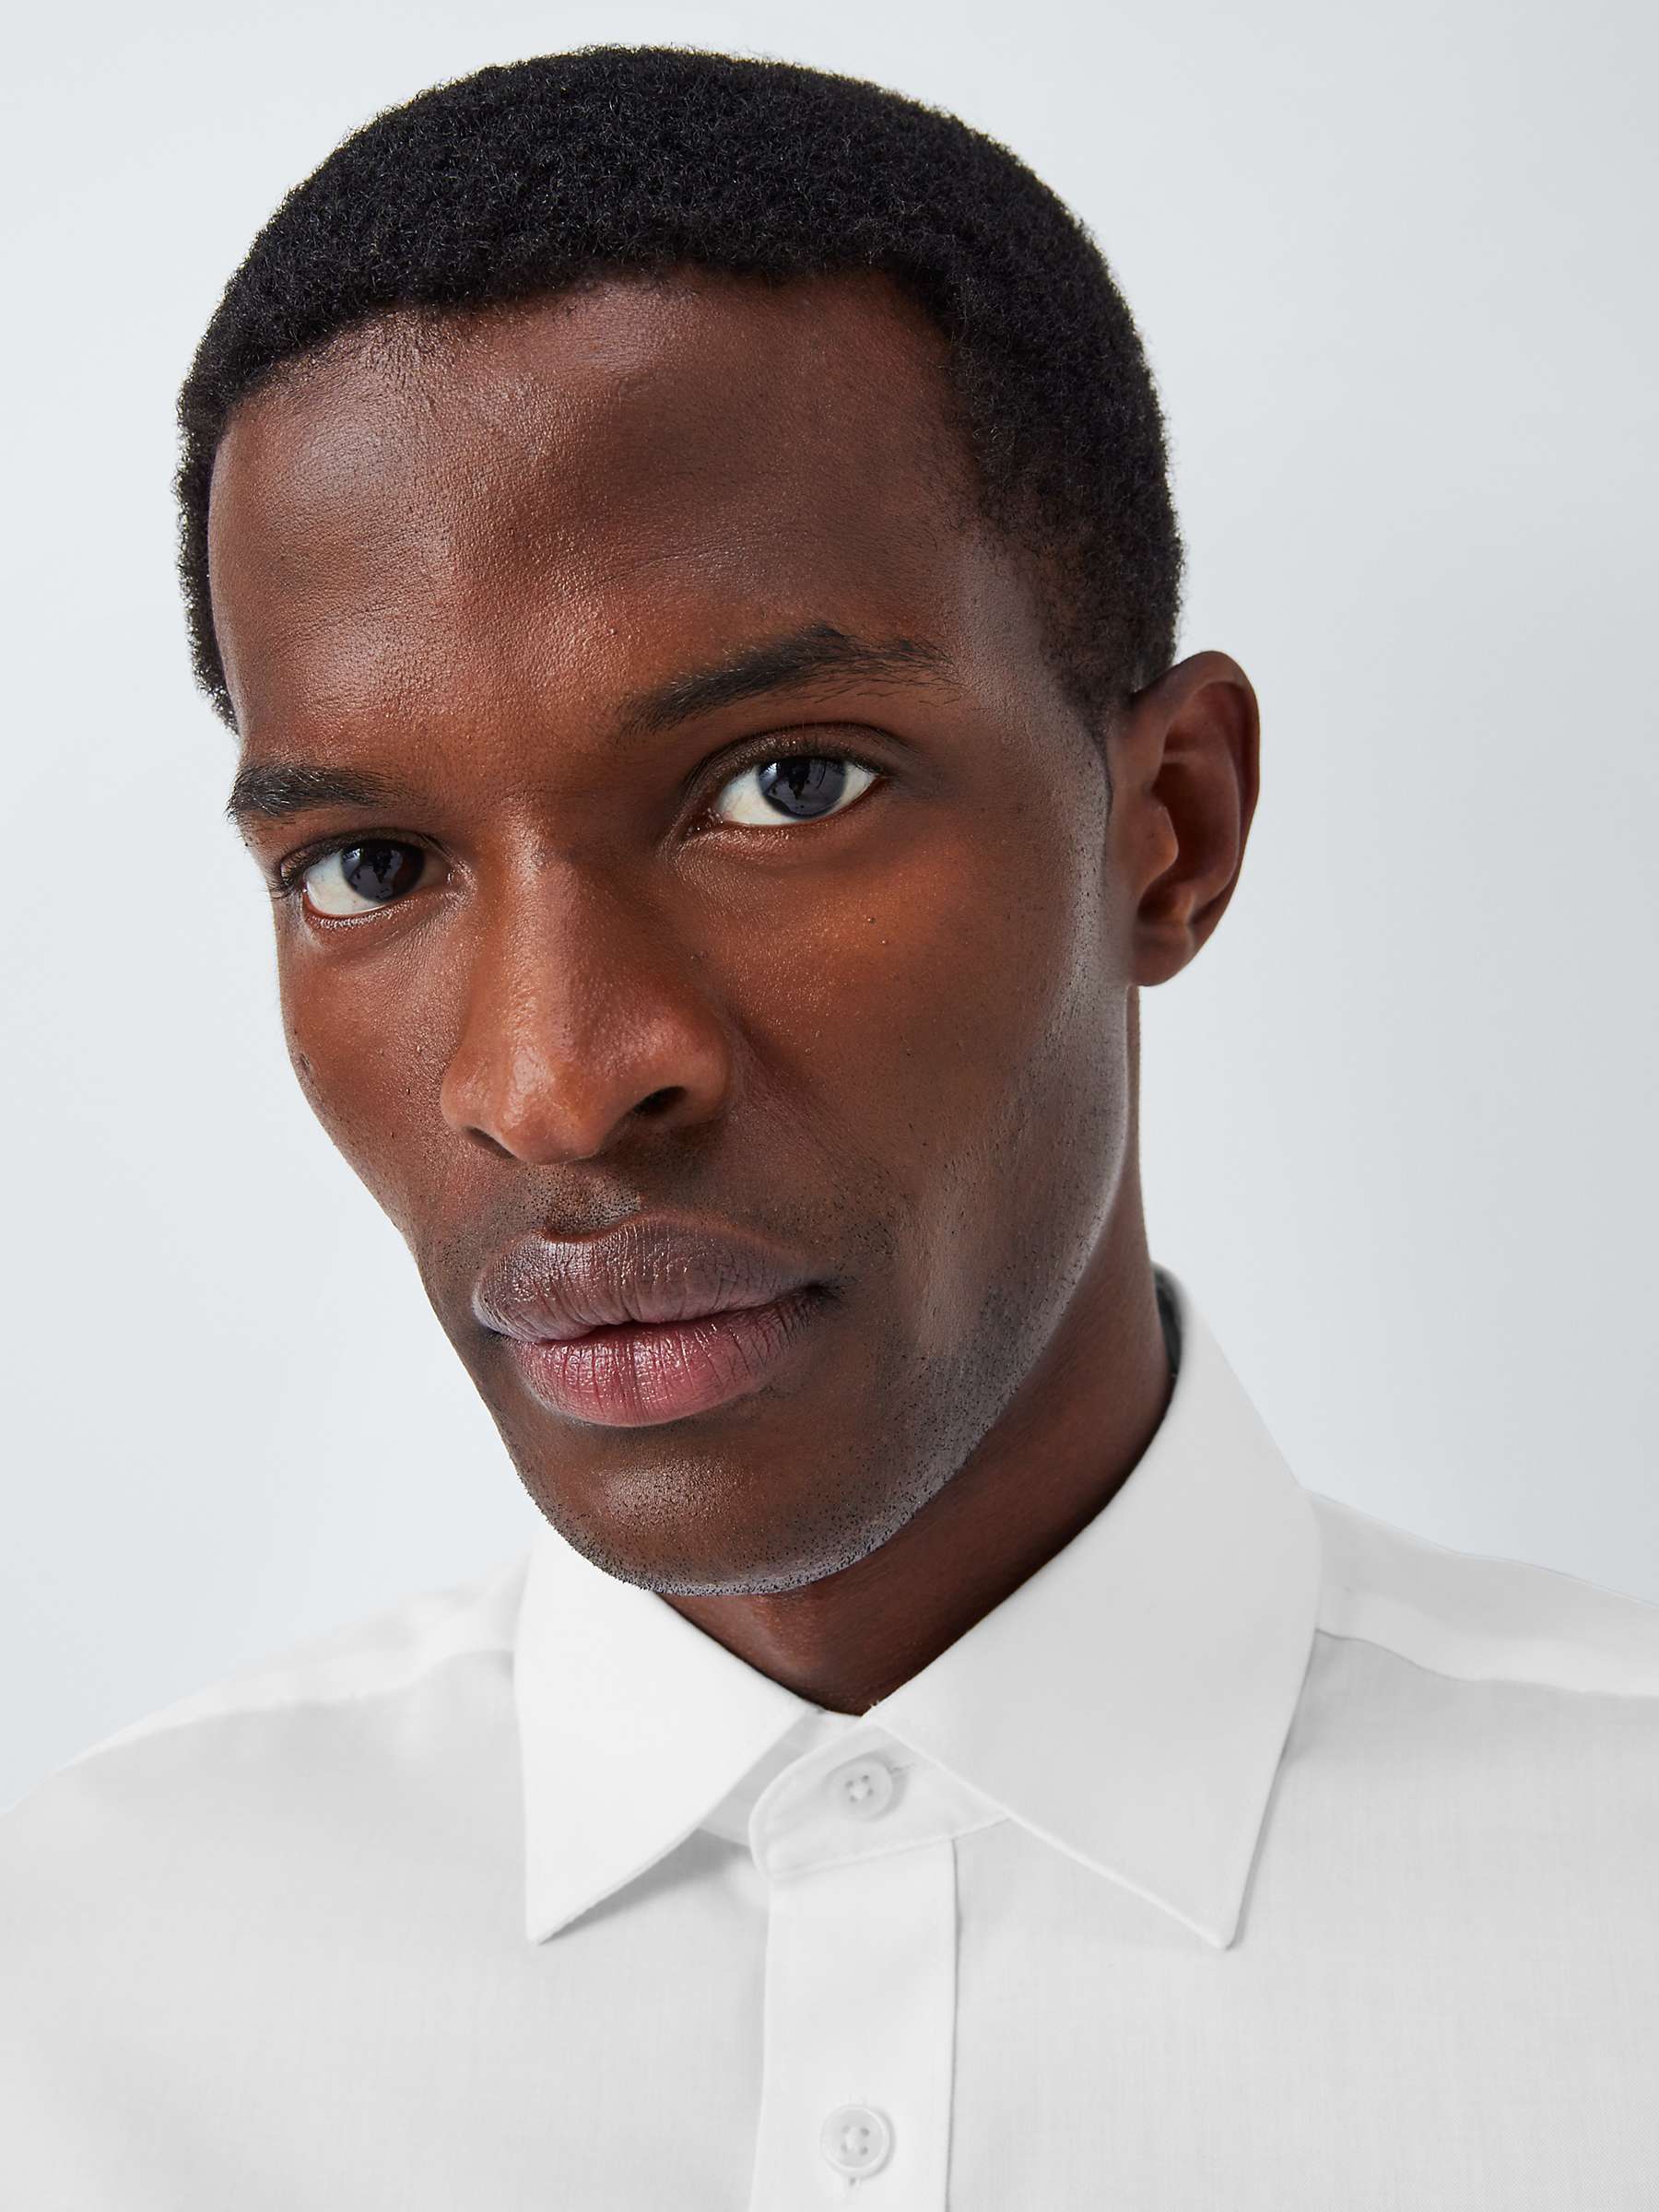 Buy John Lewis Non Iron Twill Double Cuff Slim Fit Shirt, White Online at johnlewis.com